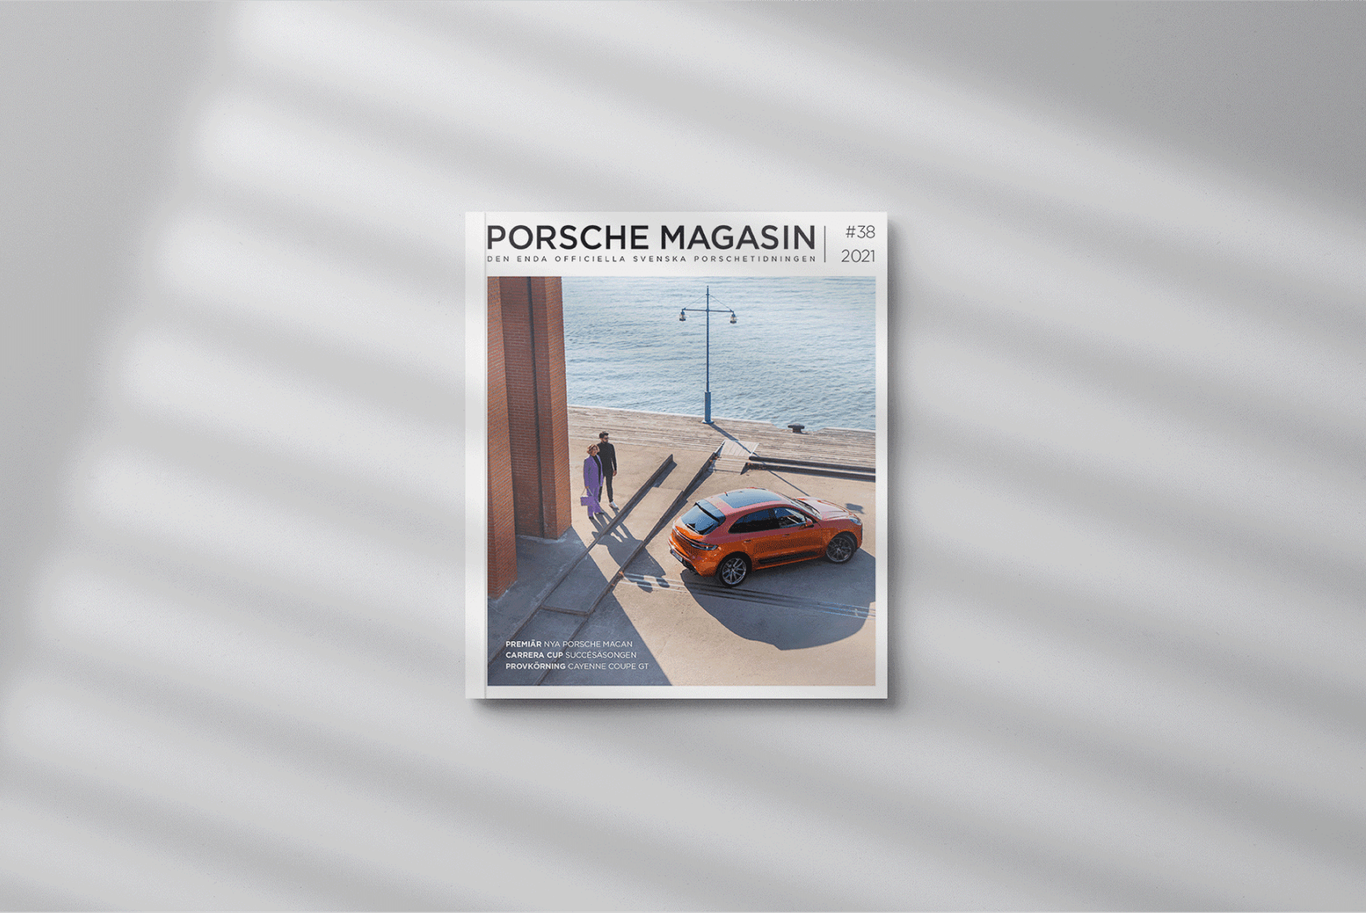 The cover of porsche magzine with a car on it.